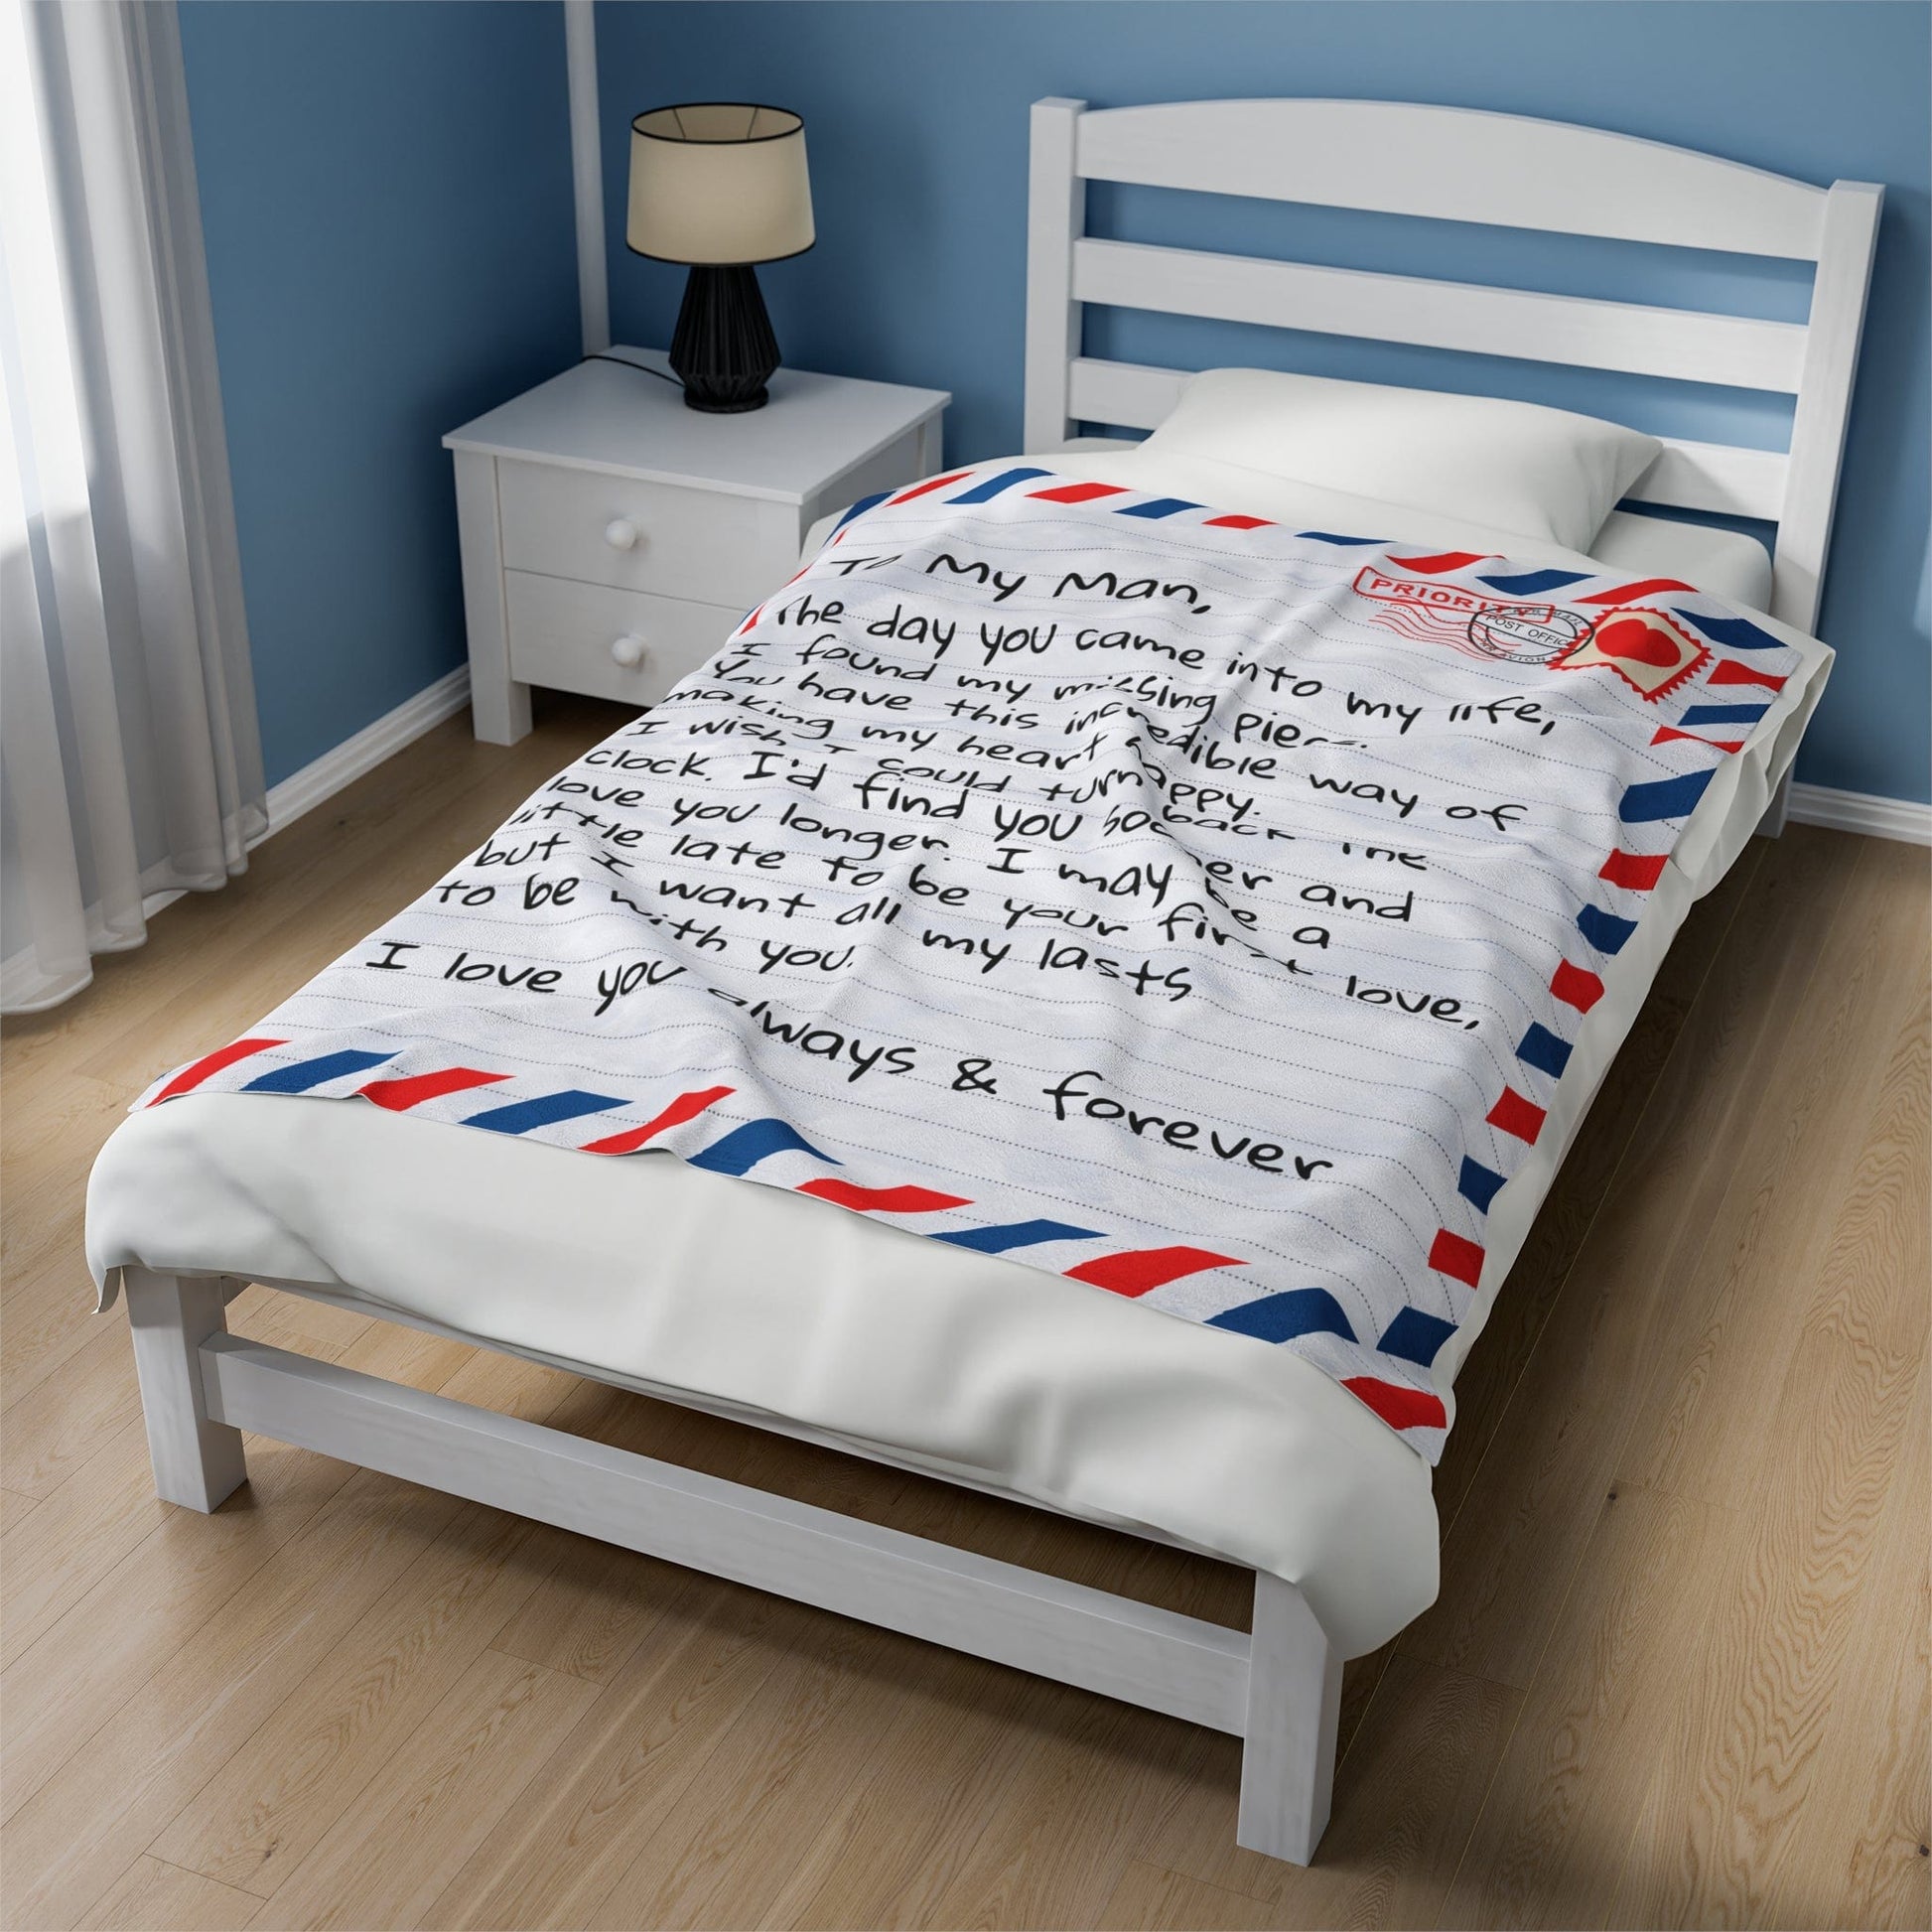 All Over Prints To My Man - Giant Love Letter Blanket - SS575